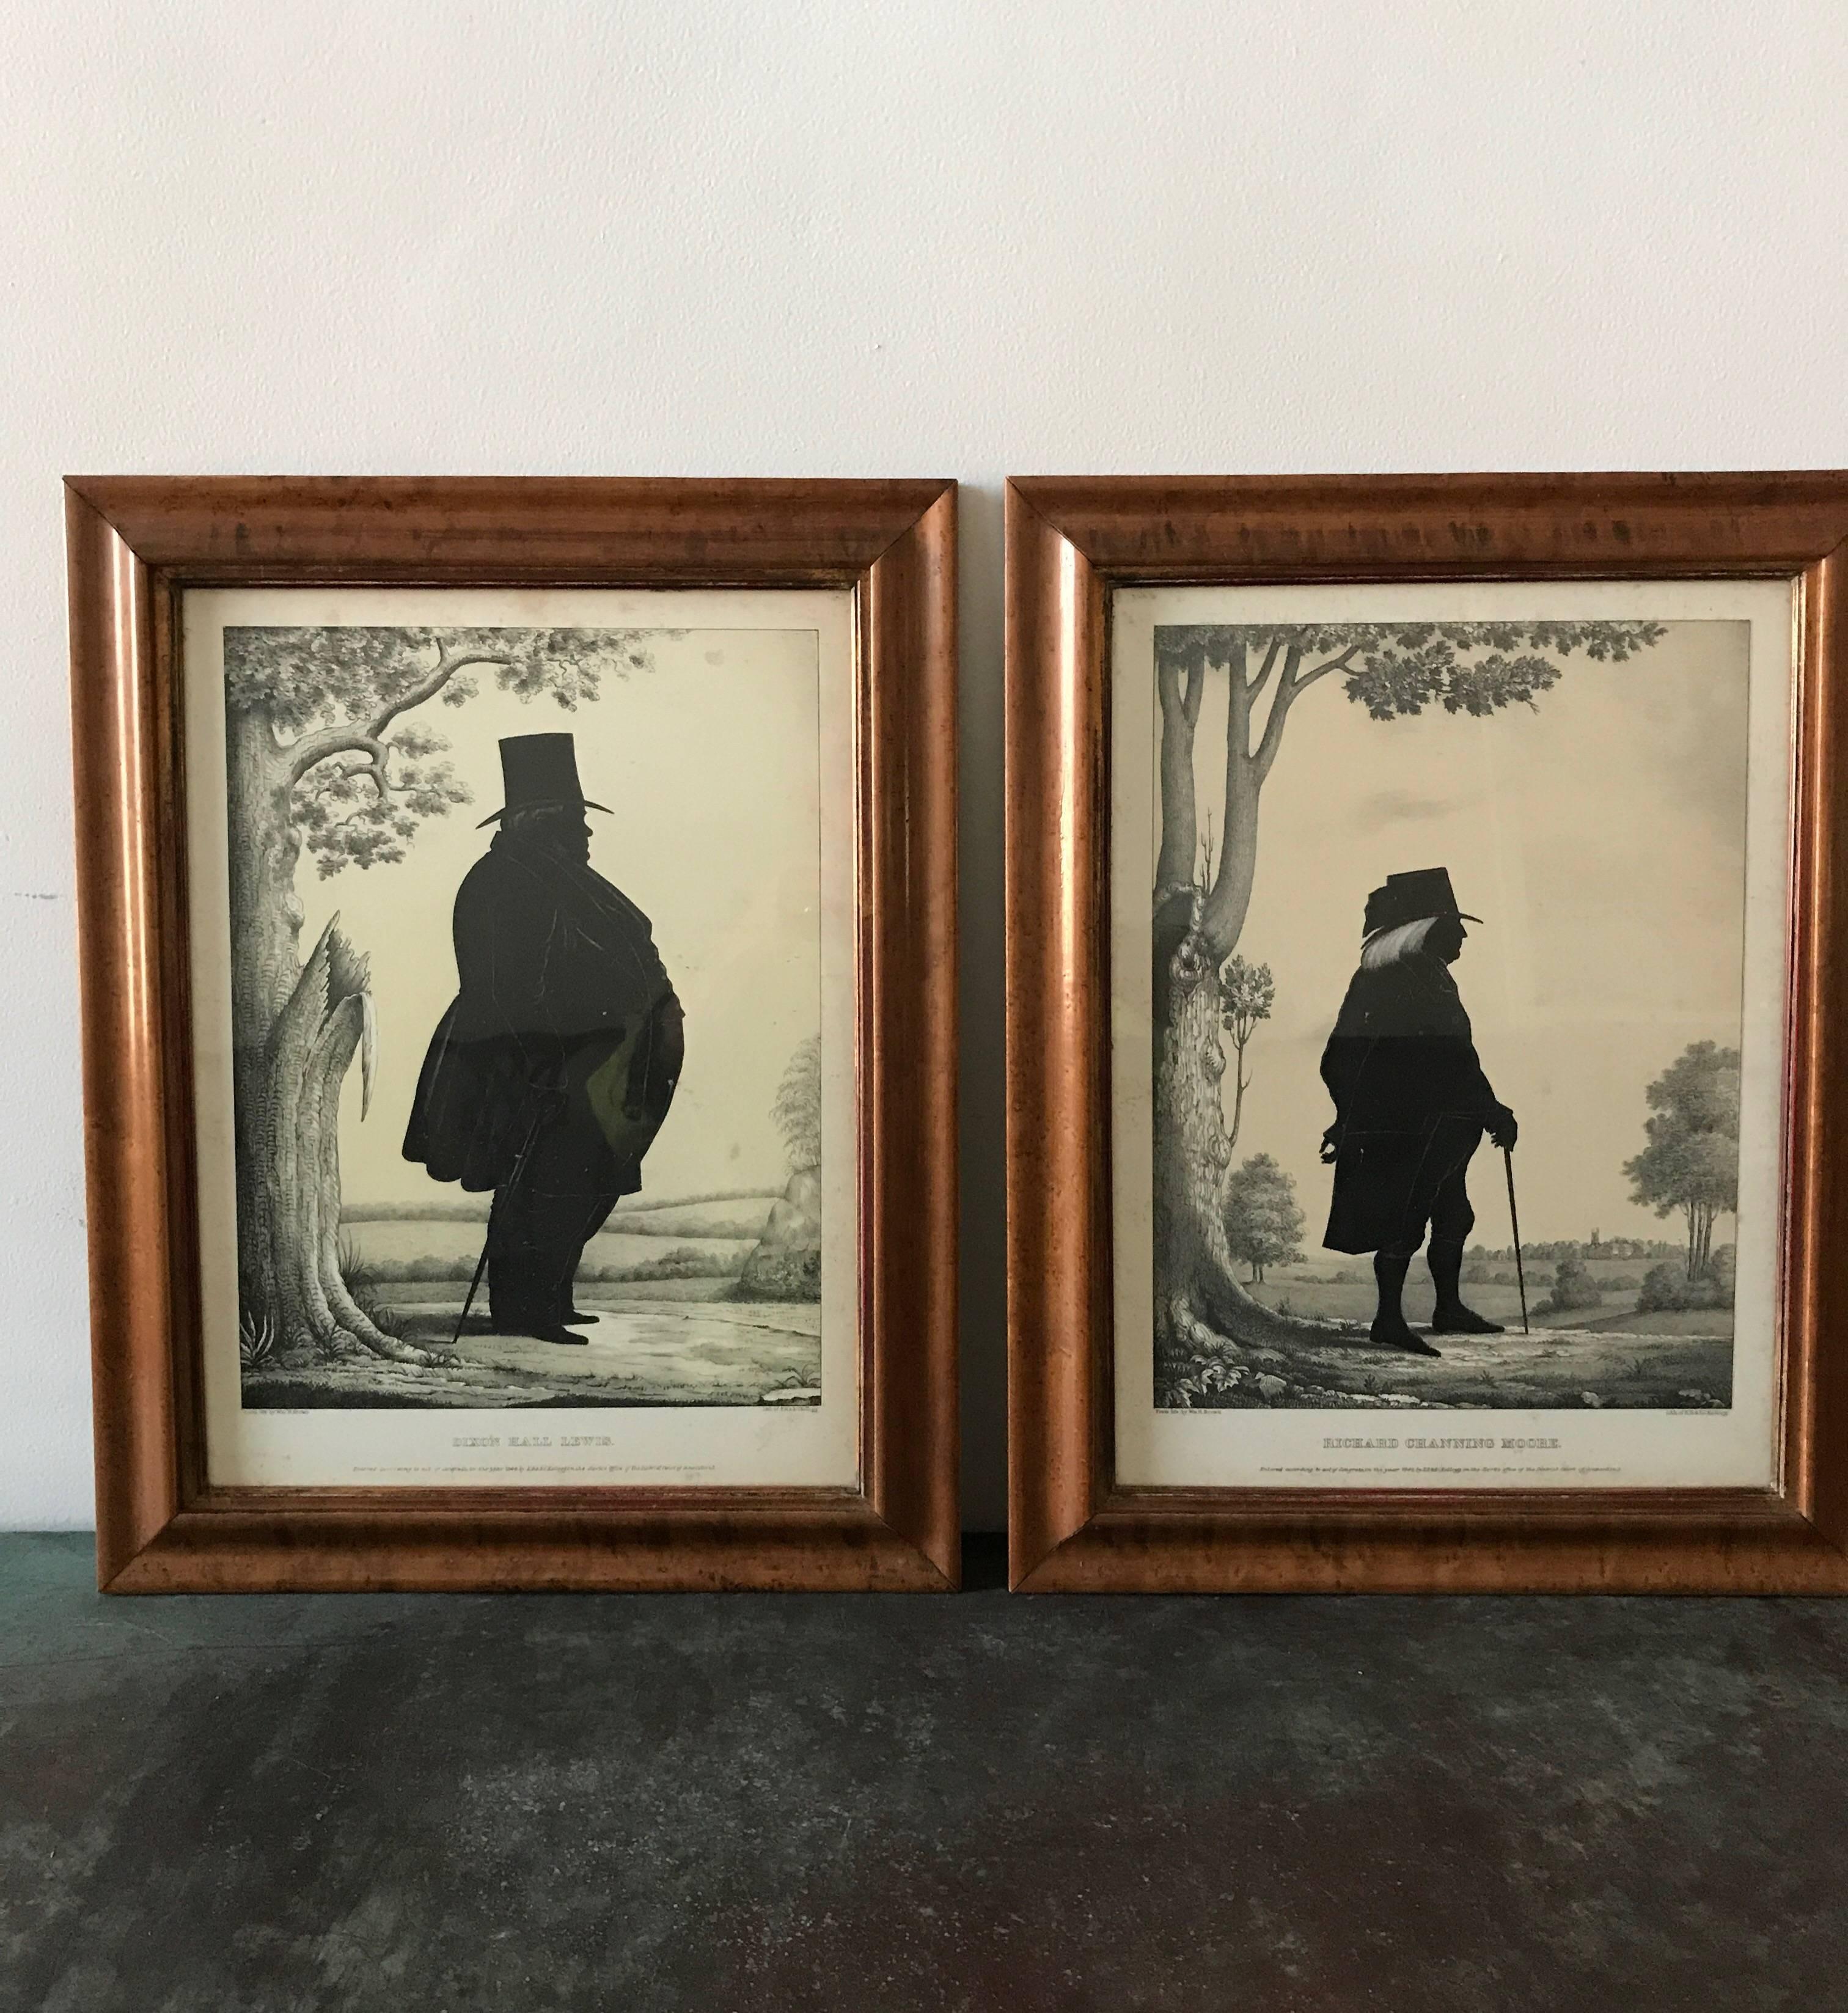 A pair of beautifully framed 19th century prints of Richard Channing Moore and Dixon Hall Lewis. 
These silhouette lithographs were printed  E. B. & E.C. Kellogg.
The circa 1844 works were drawn from life by William Brown.